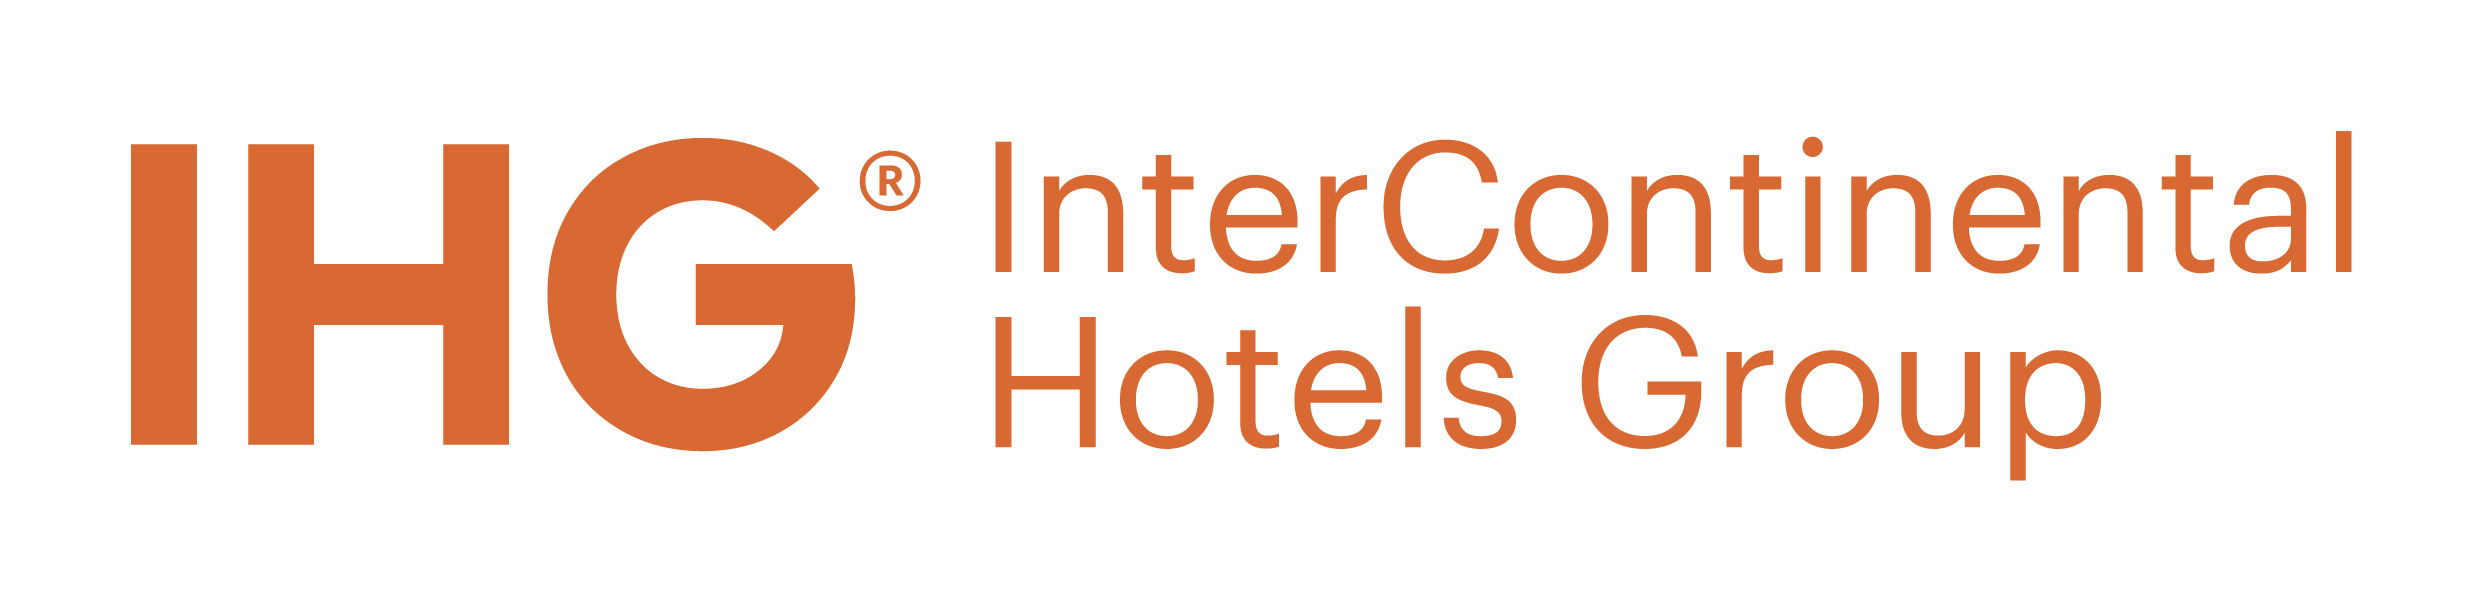 InterContinental Logo - Flying Blue Hotels Group